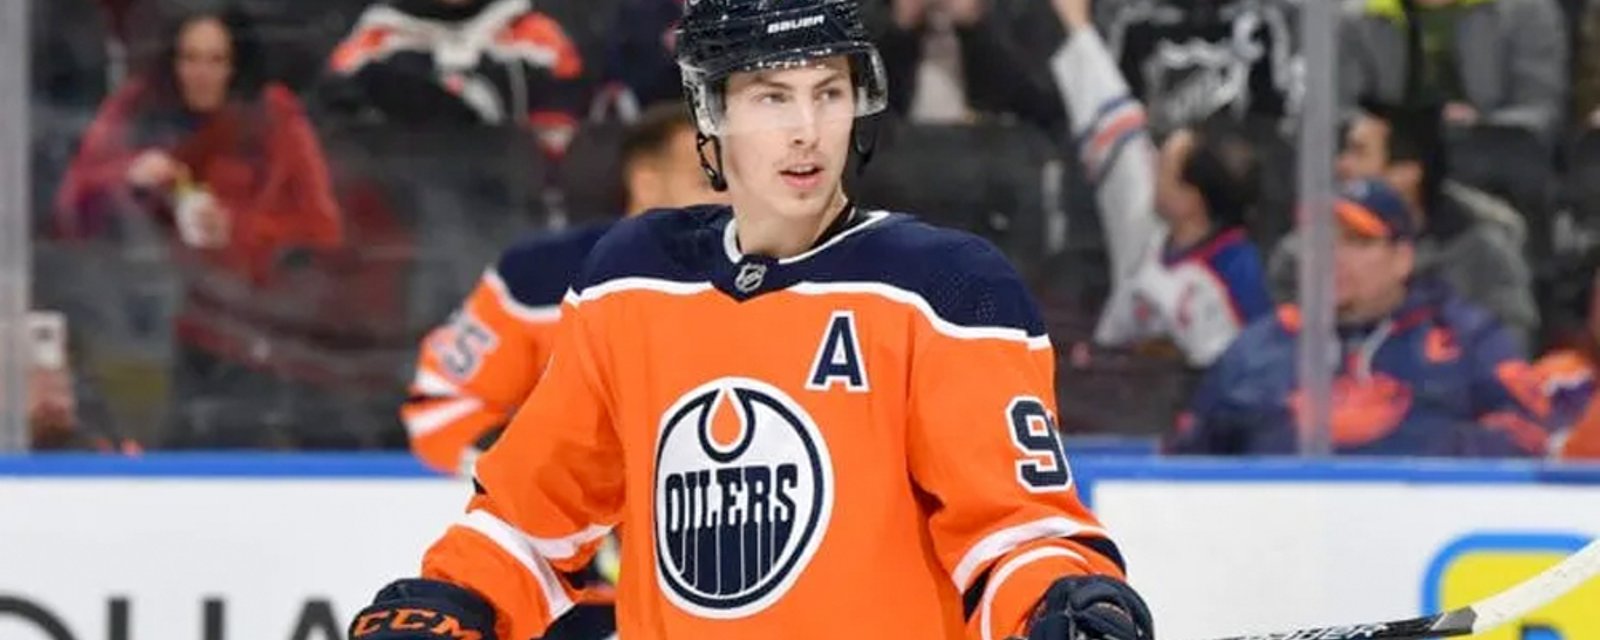 Report: Nugent-Hopkins set to sign $40 million deal with the Oilers